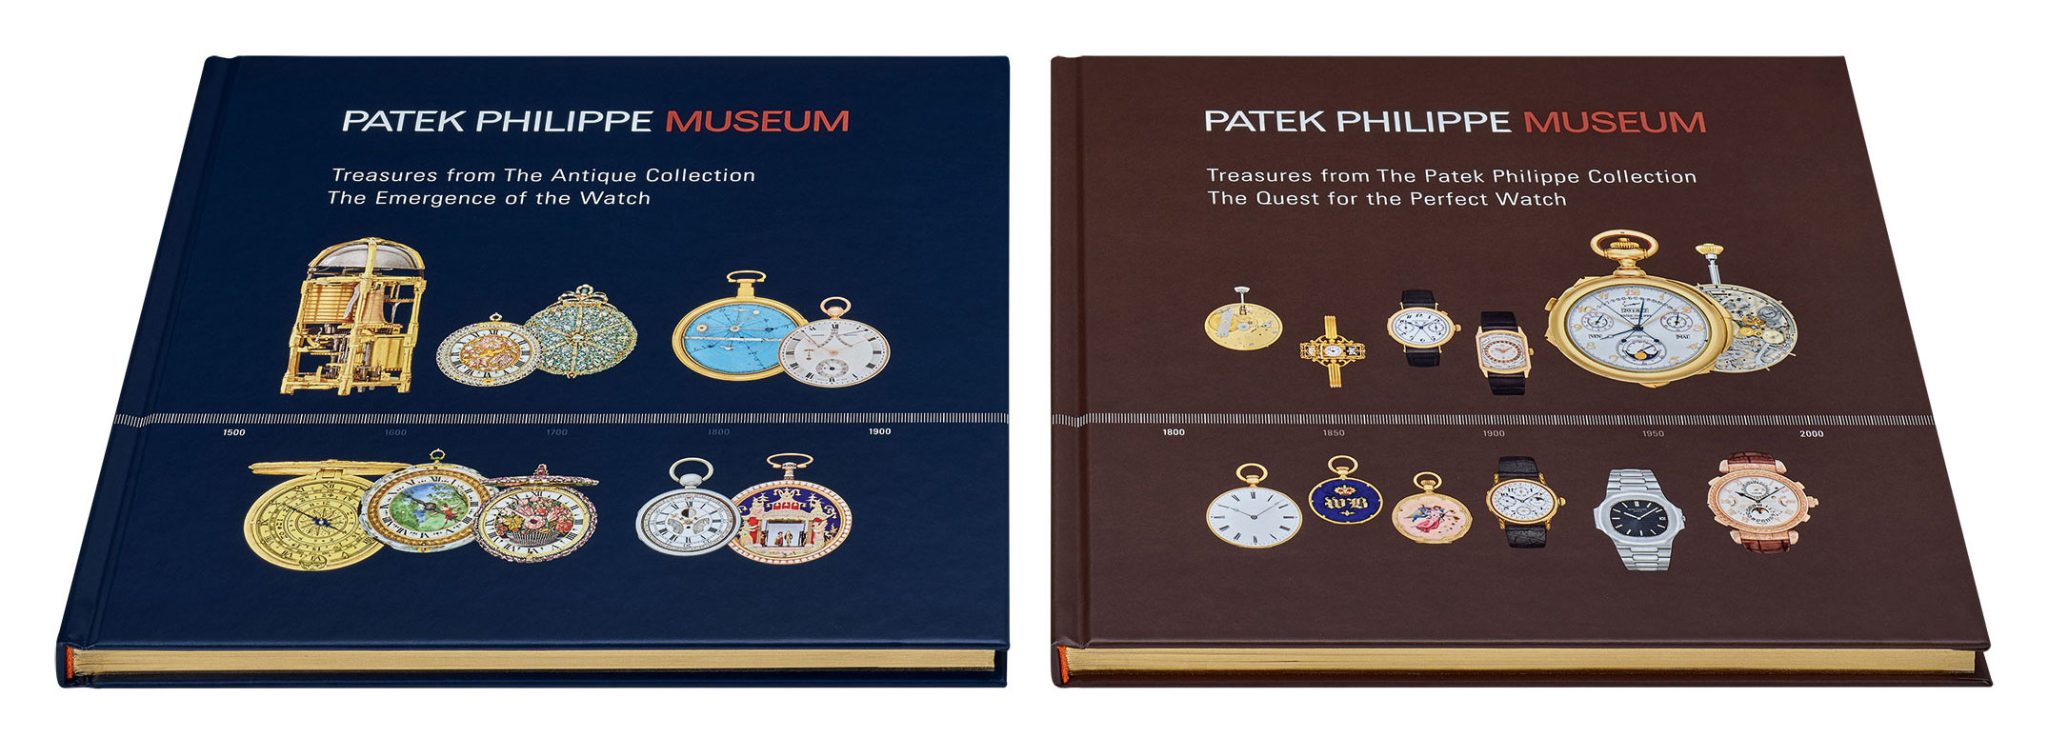 Treasures-from-the-Patek-Philippe-Collection-The-Emergence-of-the-Watch-Vol-1-The-Quest-for-the-Perfect-Watch-Vol-2